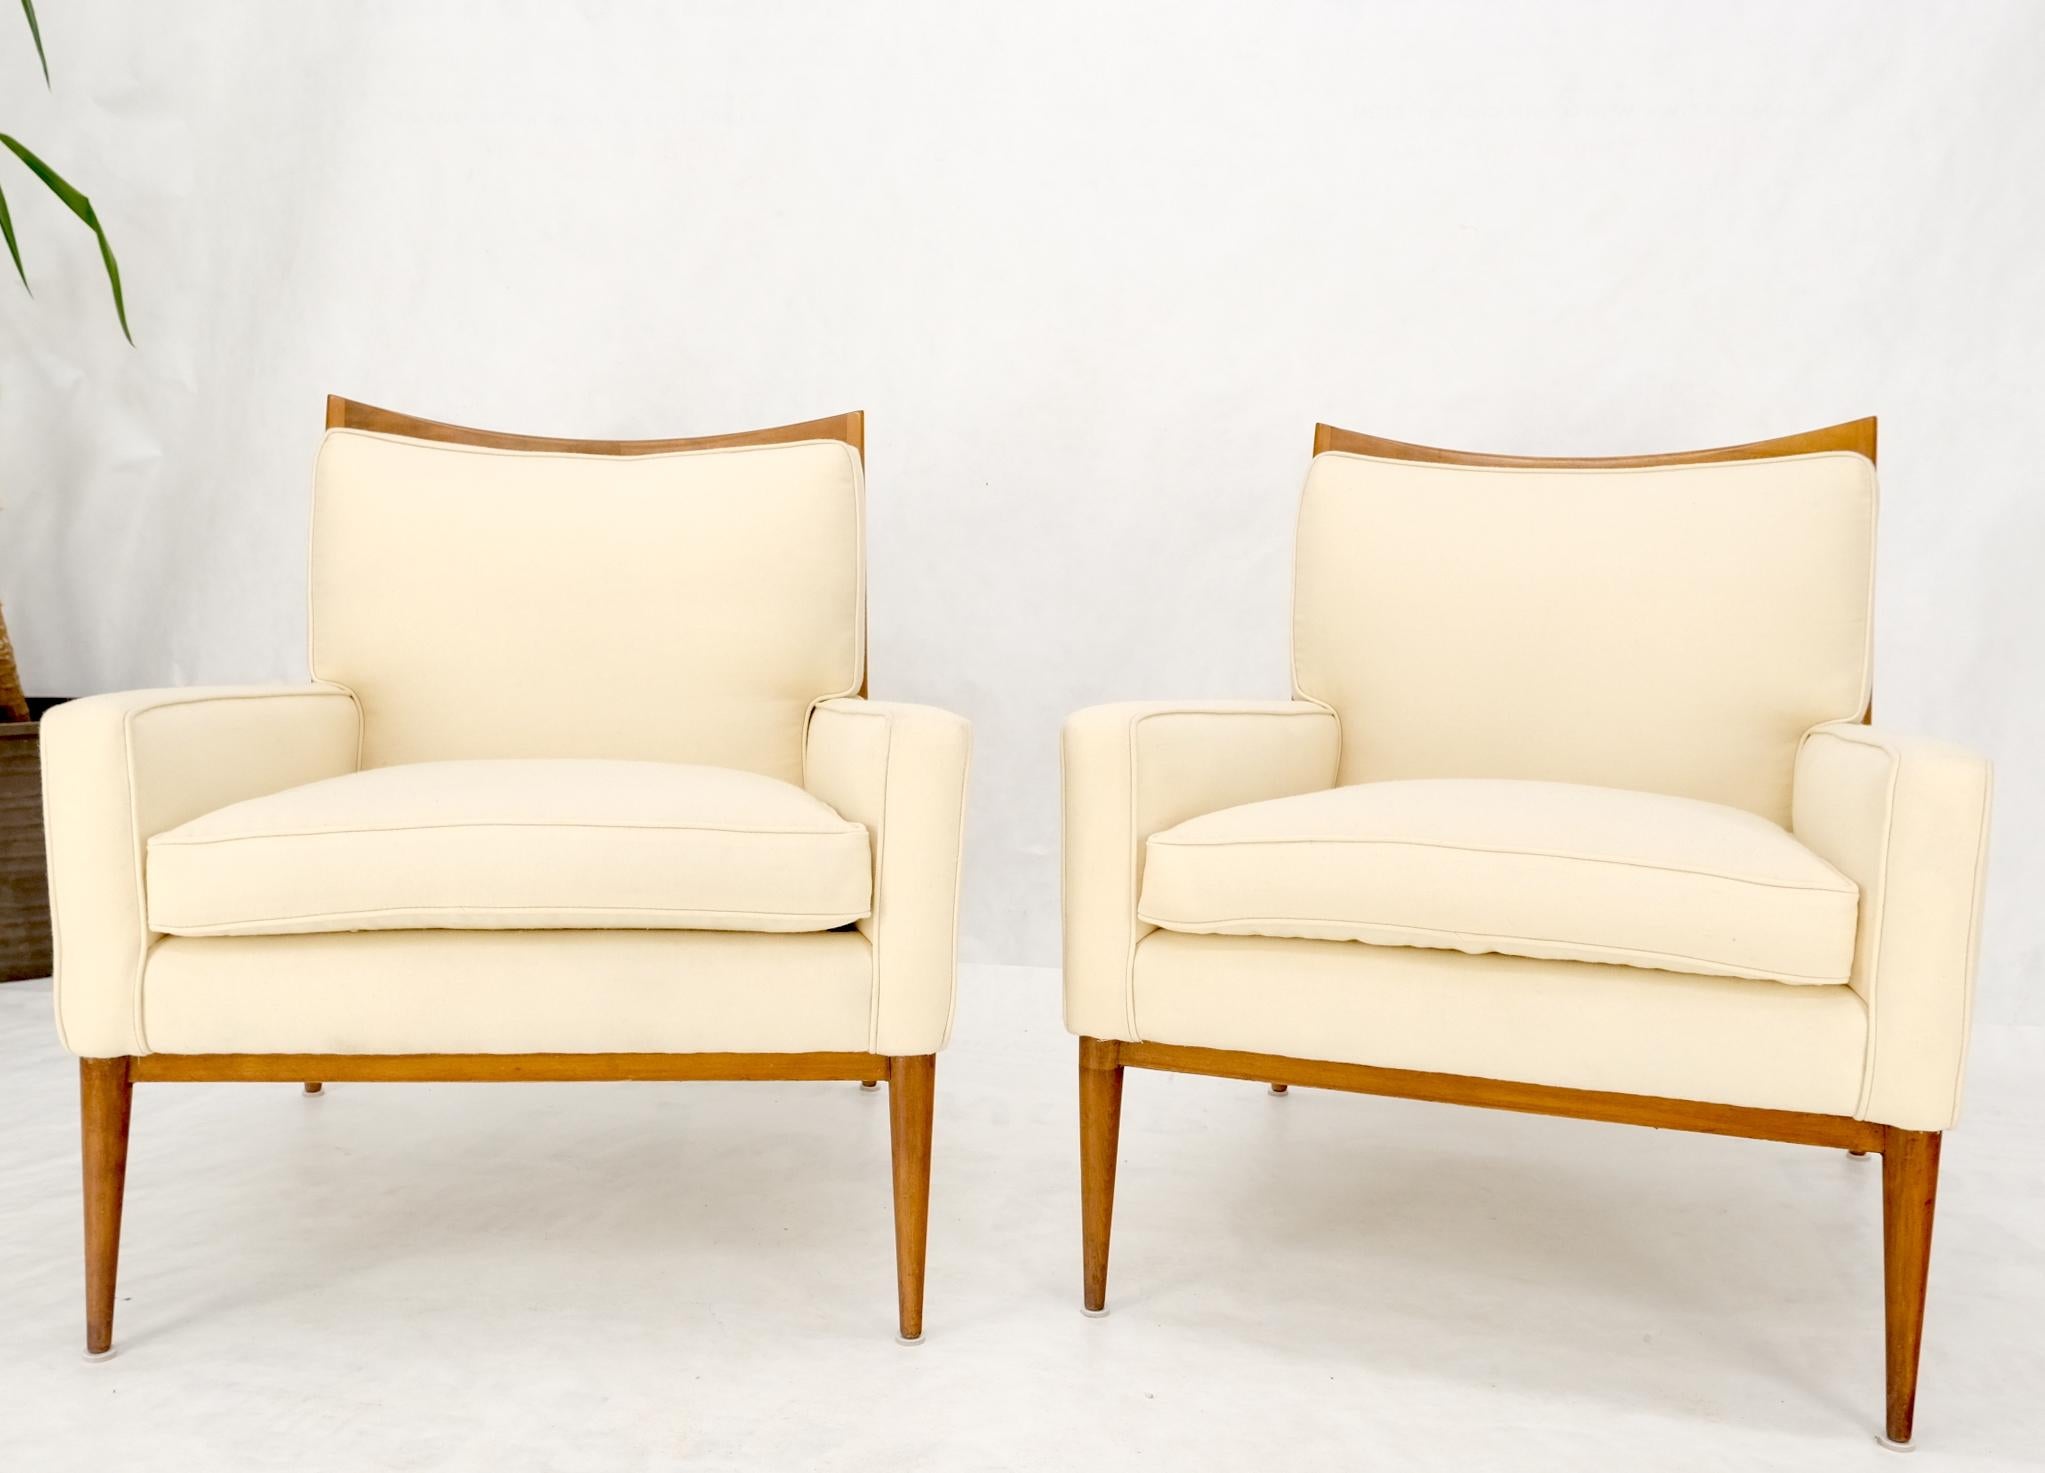 Pair of Mid Century Modern McCobb Chairs Newly Upholstered in Cream Virgin Wool For Sale 10